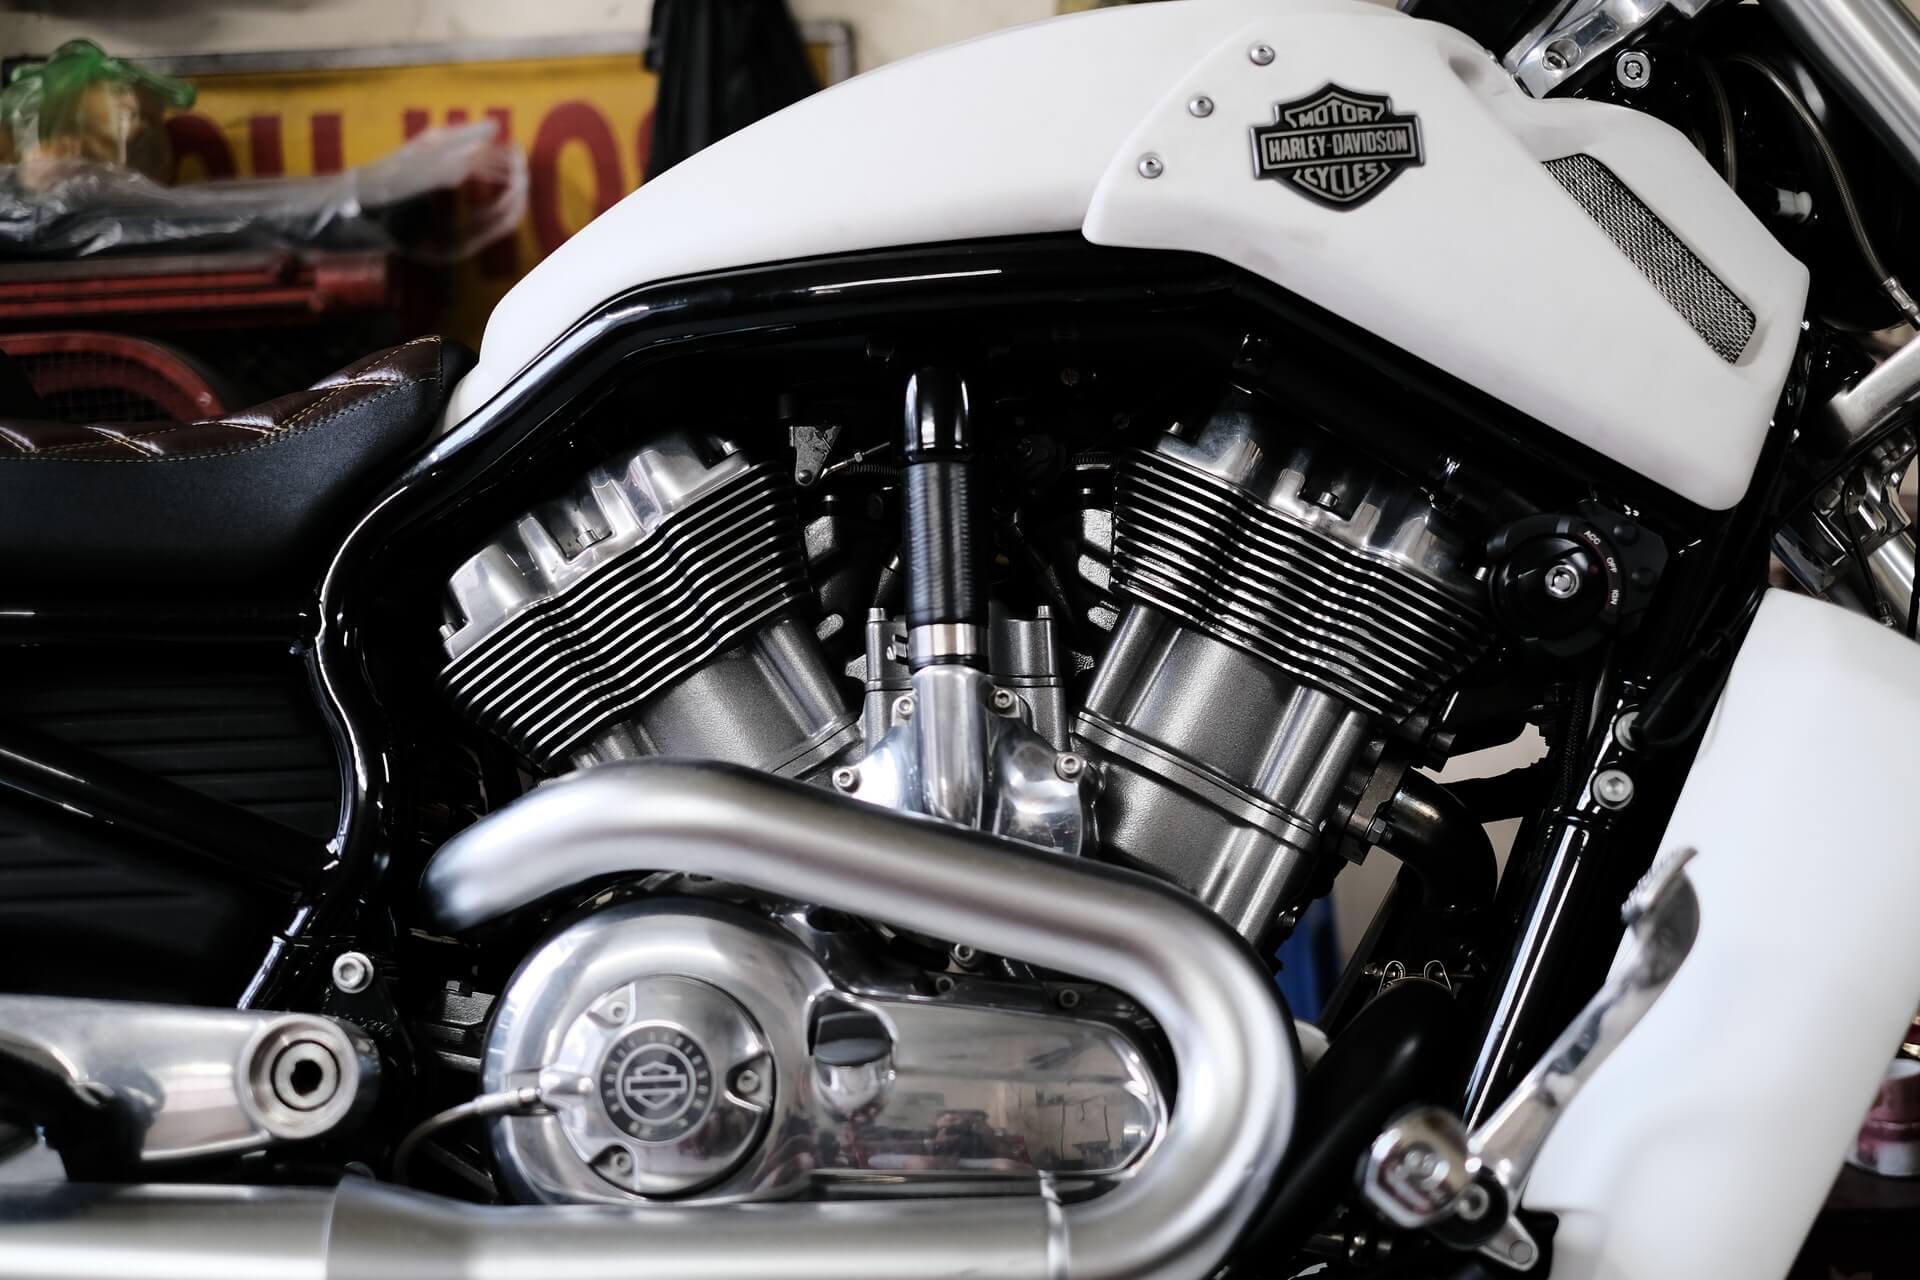 Harley engine with cover on